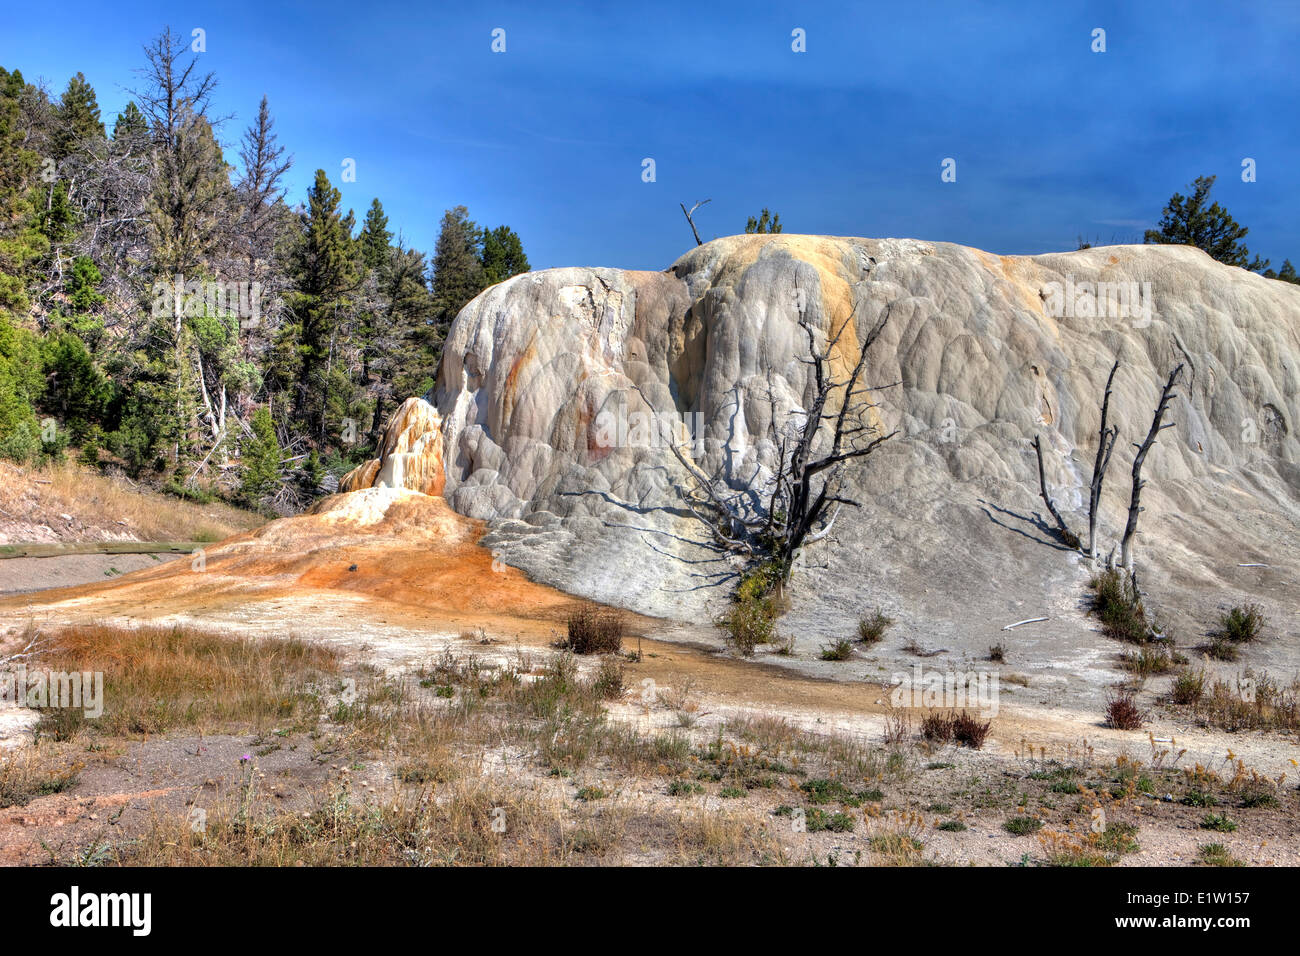 Printemps Orange Mound, Mammoth Hot Springs, Parc National de Yellowstone, Wyoming, USA Banque D'Images